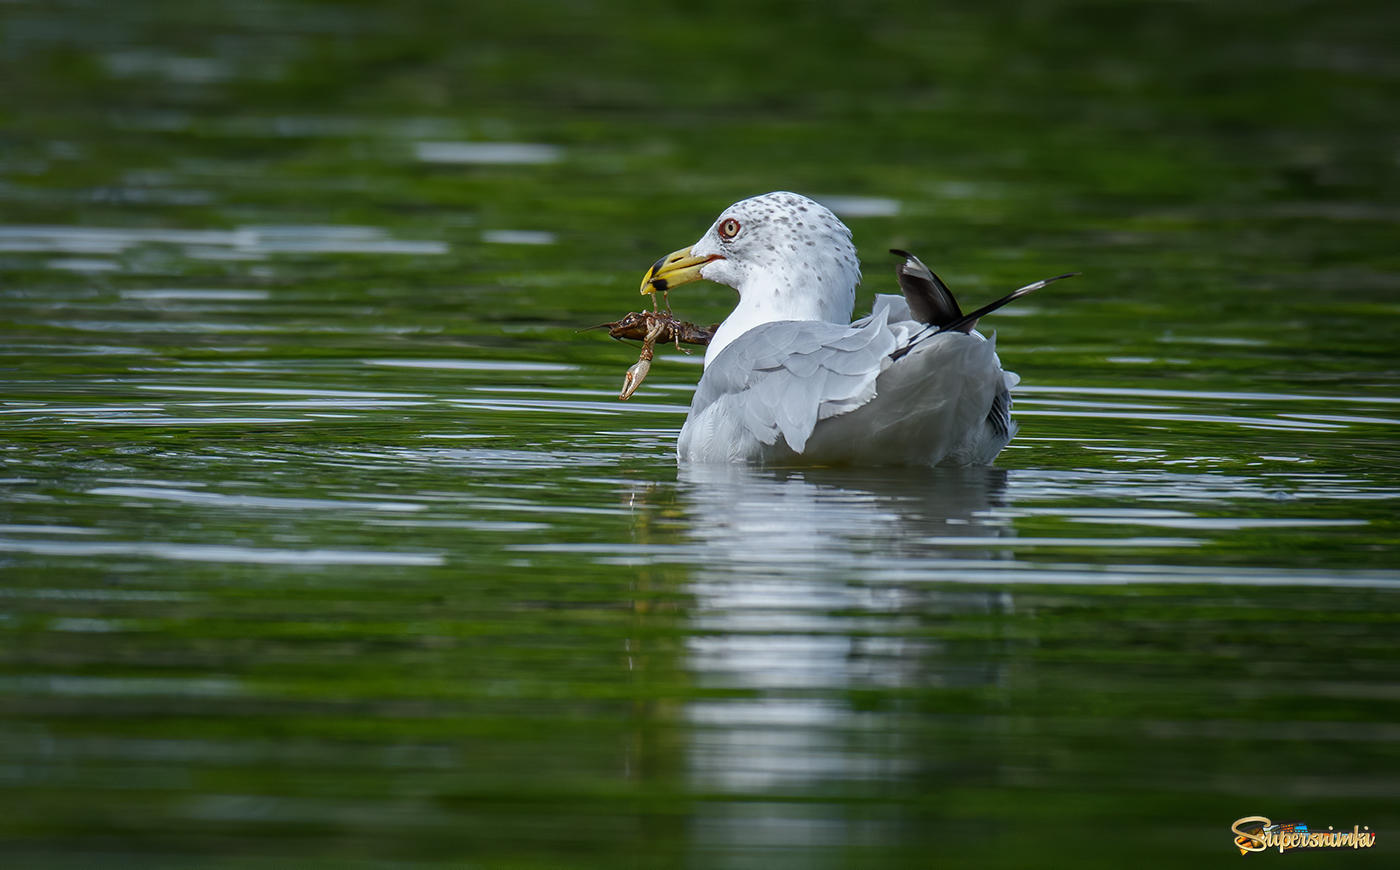 Ring-billed Gull with snack